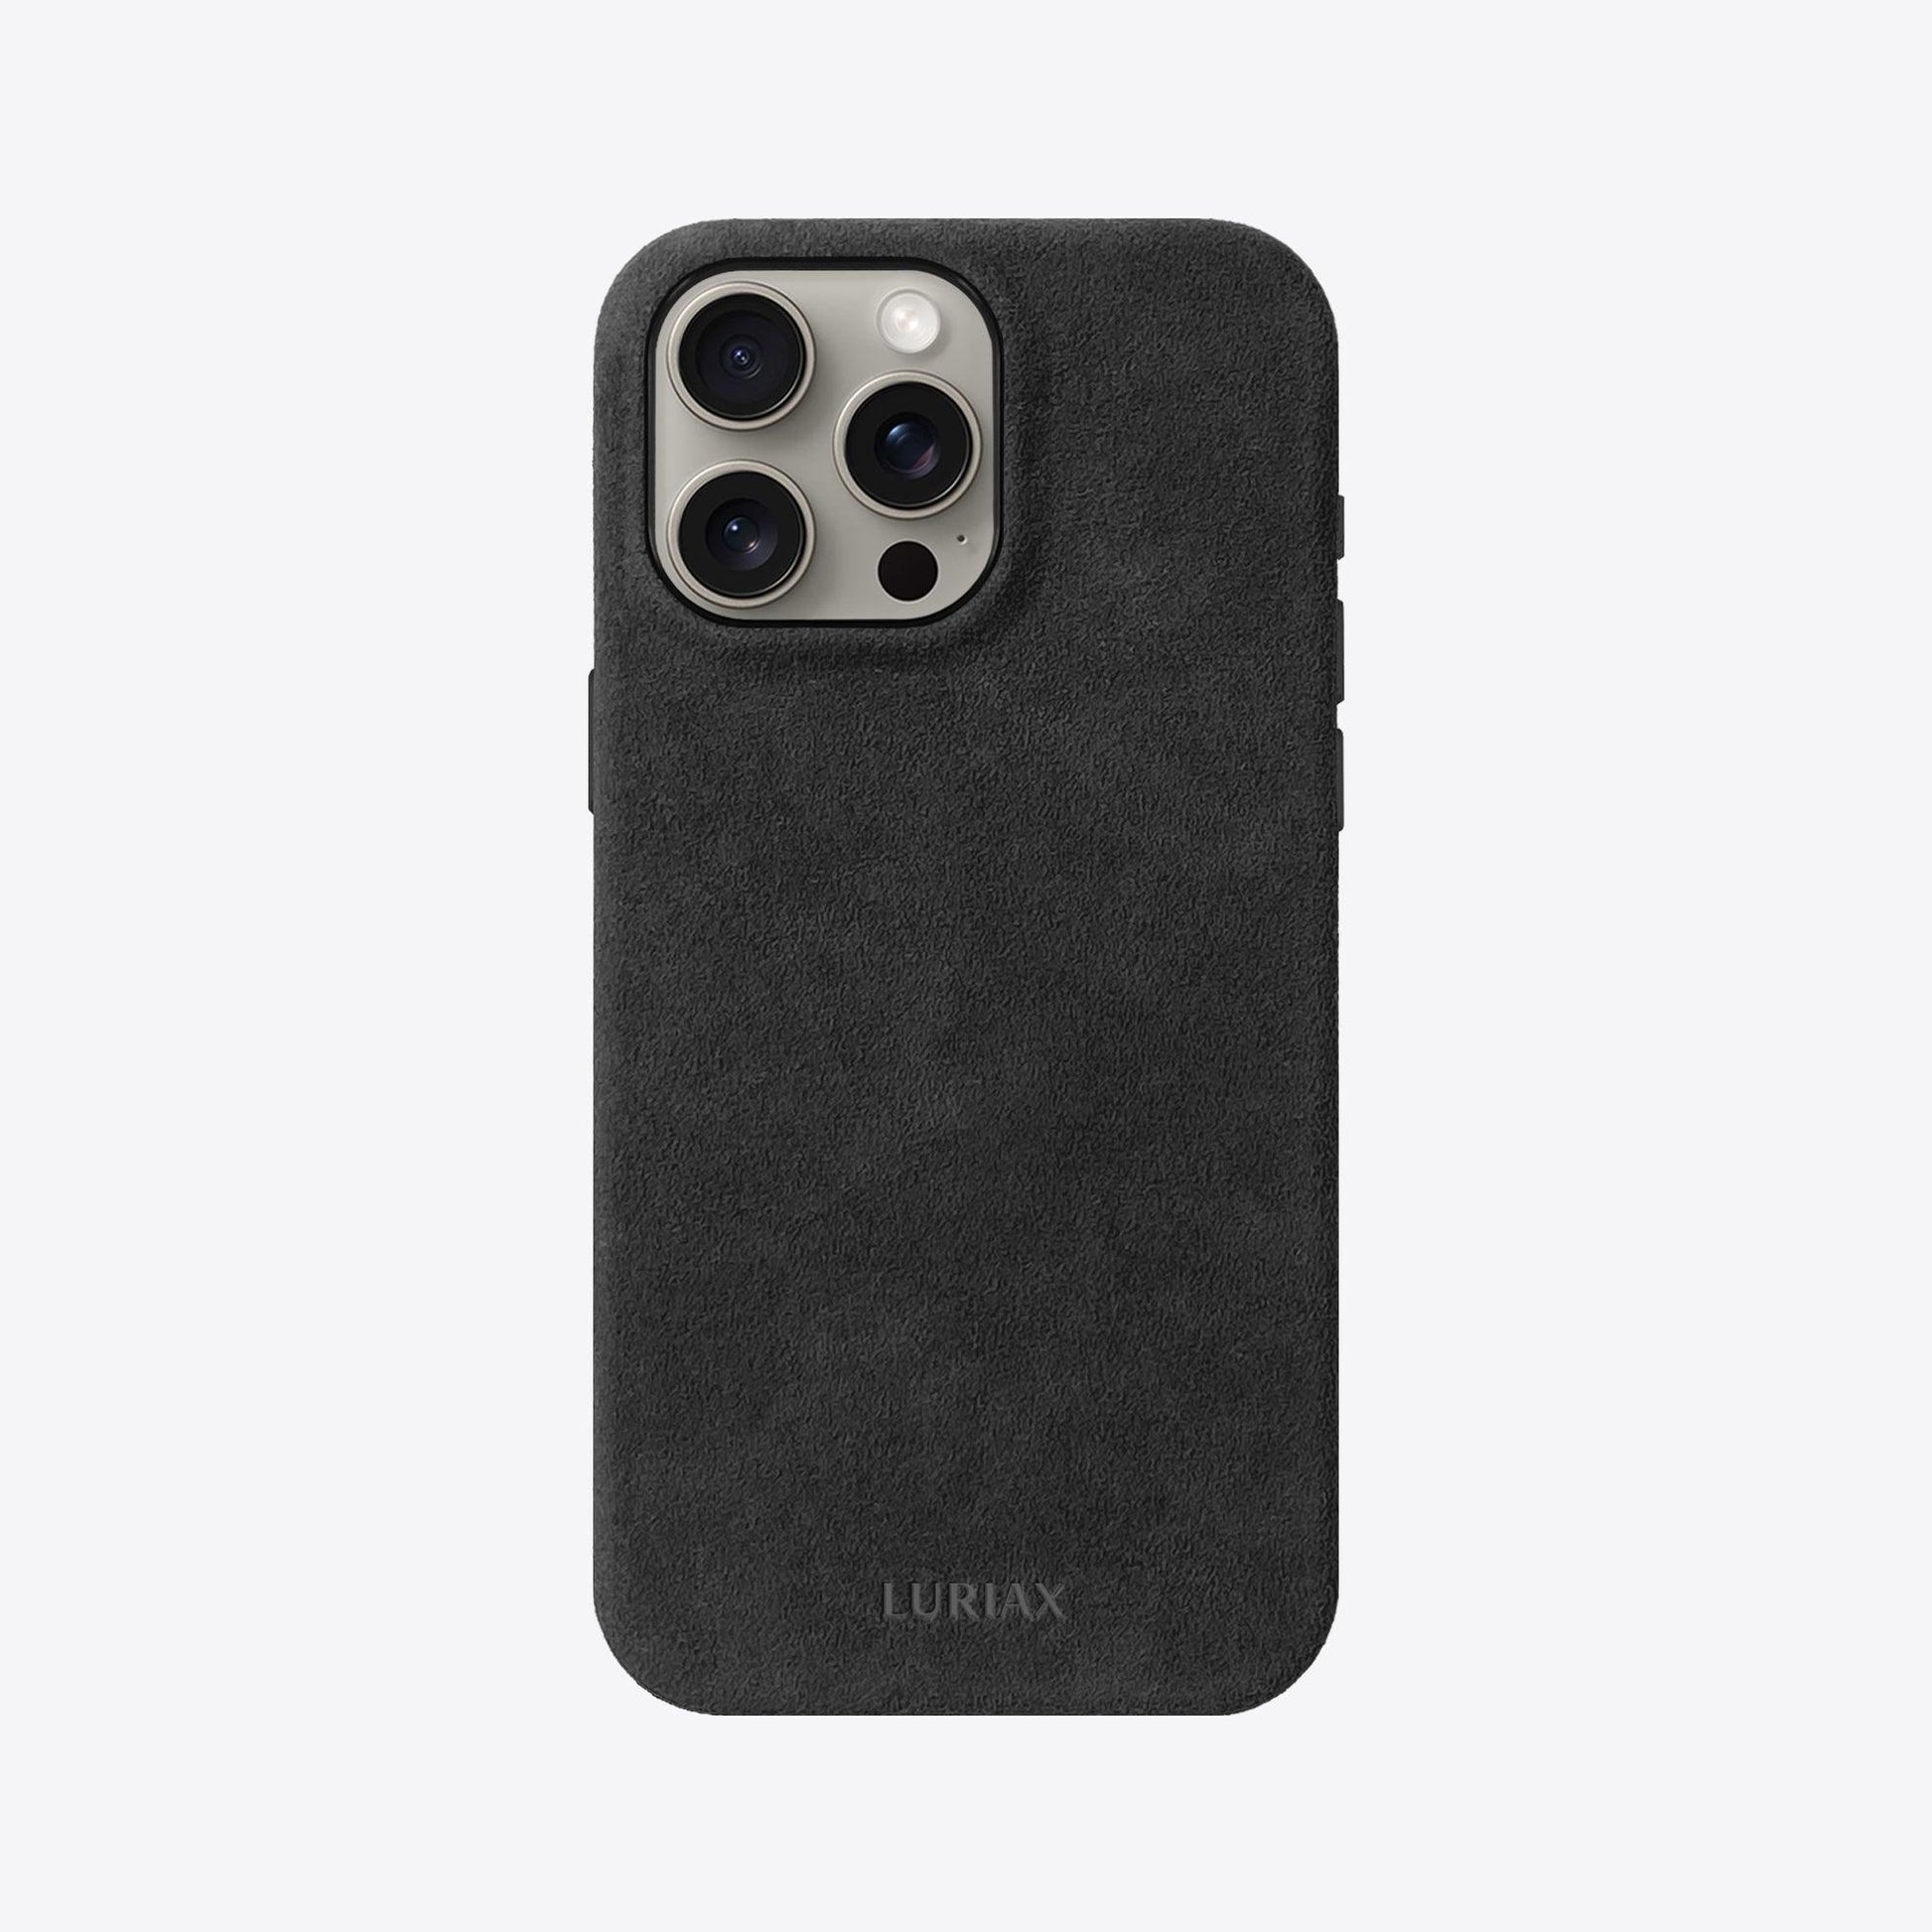 Alcantara Suede Leather iPhone Case and Accessories Collection - The Classic iPhone Case V2 - Charcoal Black - Luriax